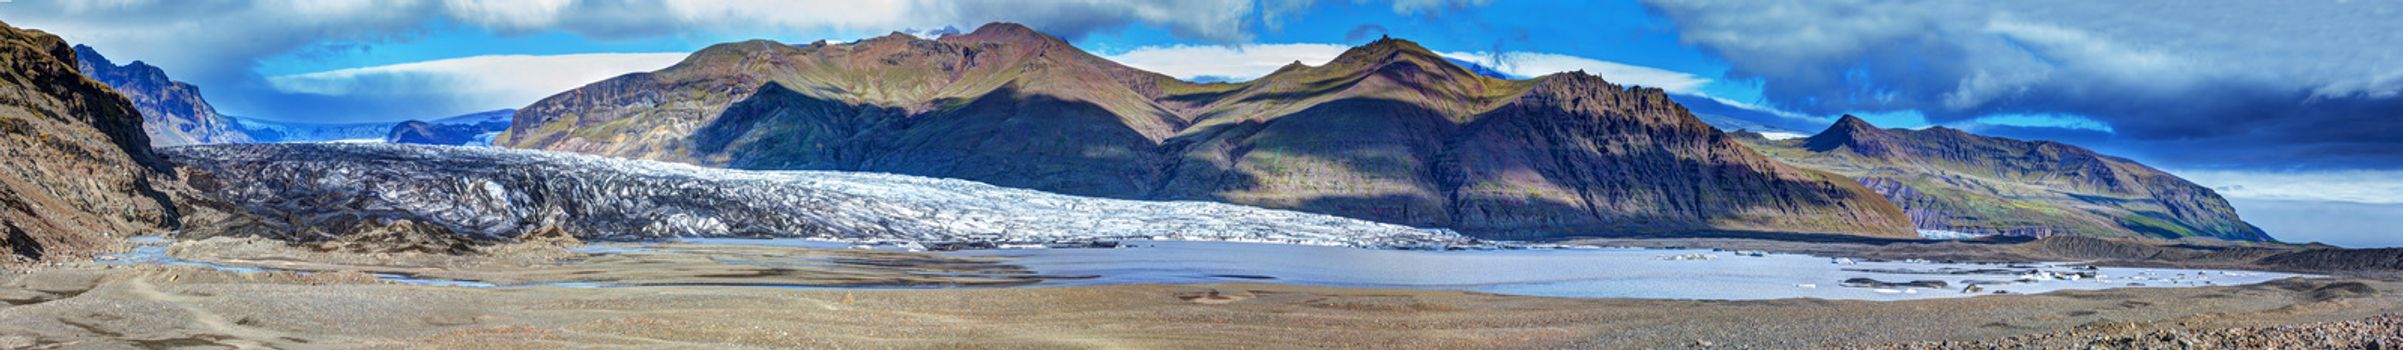 Panorama of the Vatnajokull Glacier Iceland. Biggest glacier in Europe and is in the Skaftafell National Park.